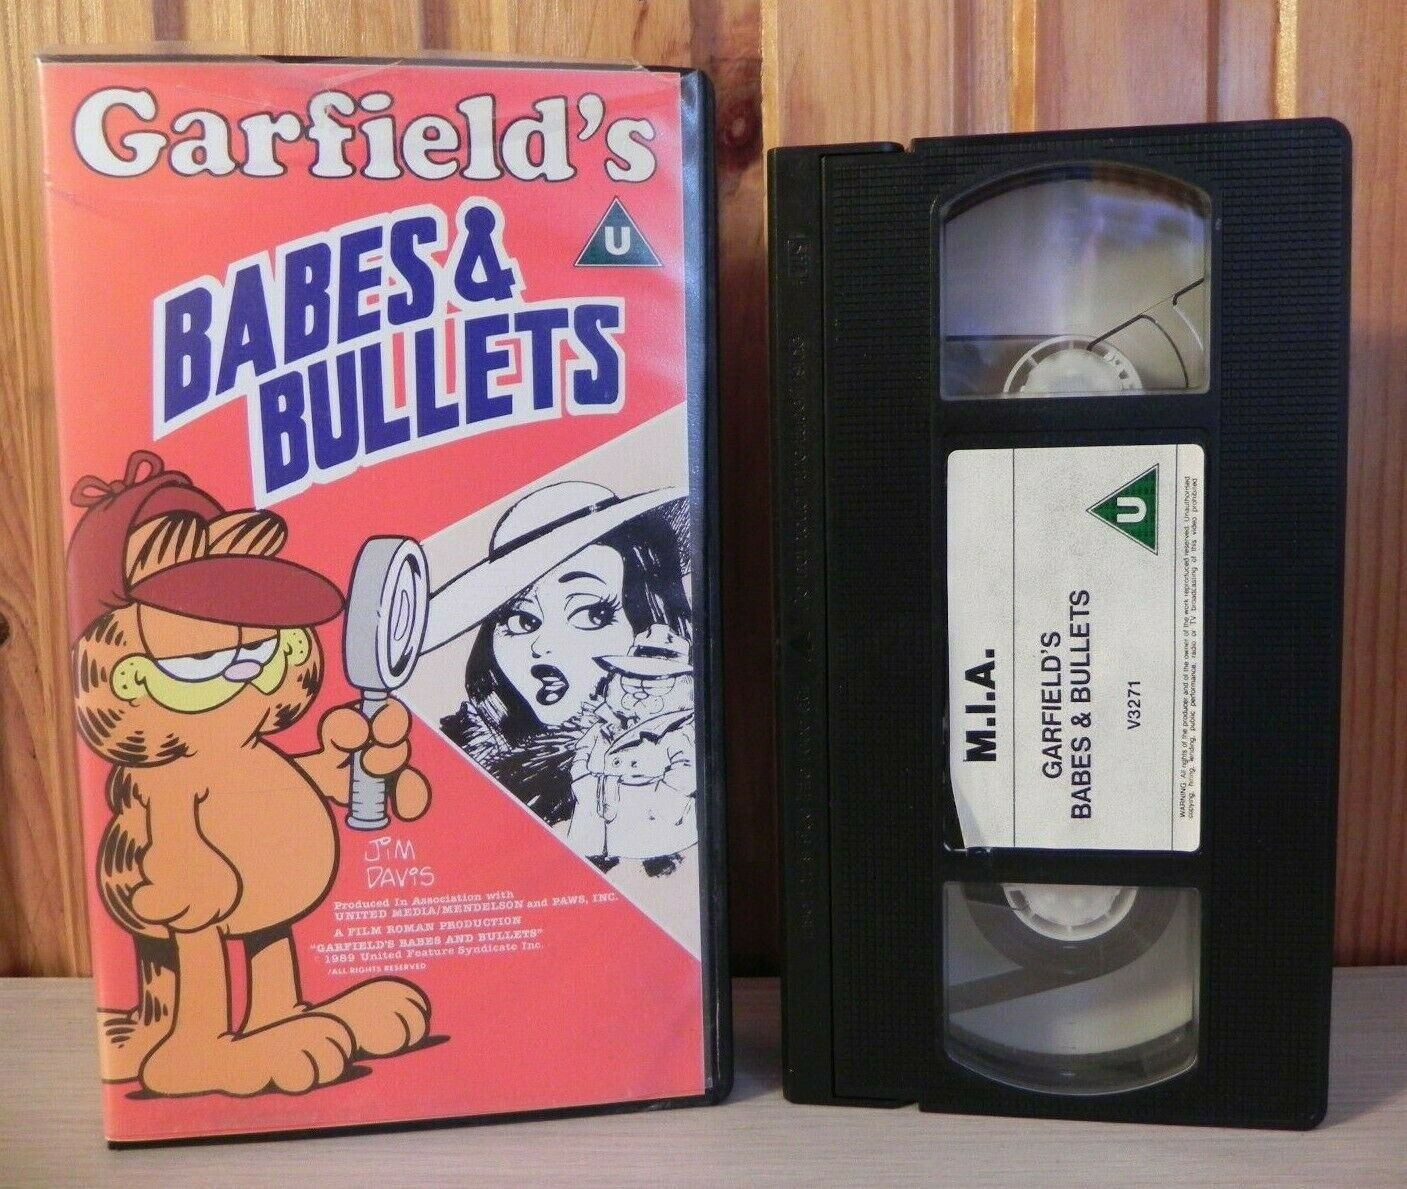 Garfield: Babes And Bullets - By Jim Davis - Animated Adventures - Kids - VHS-